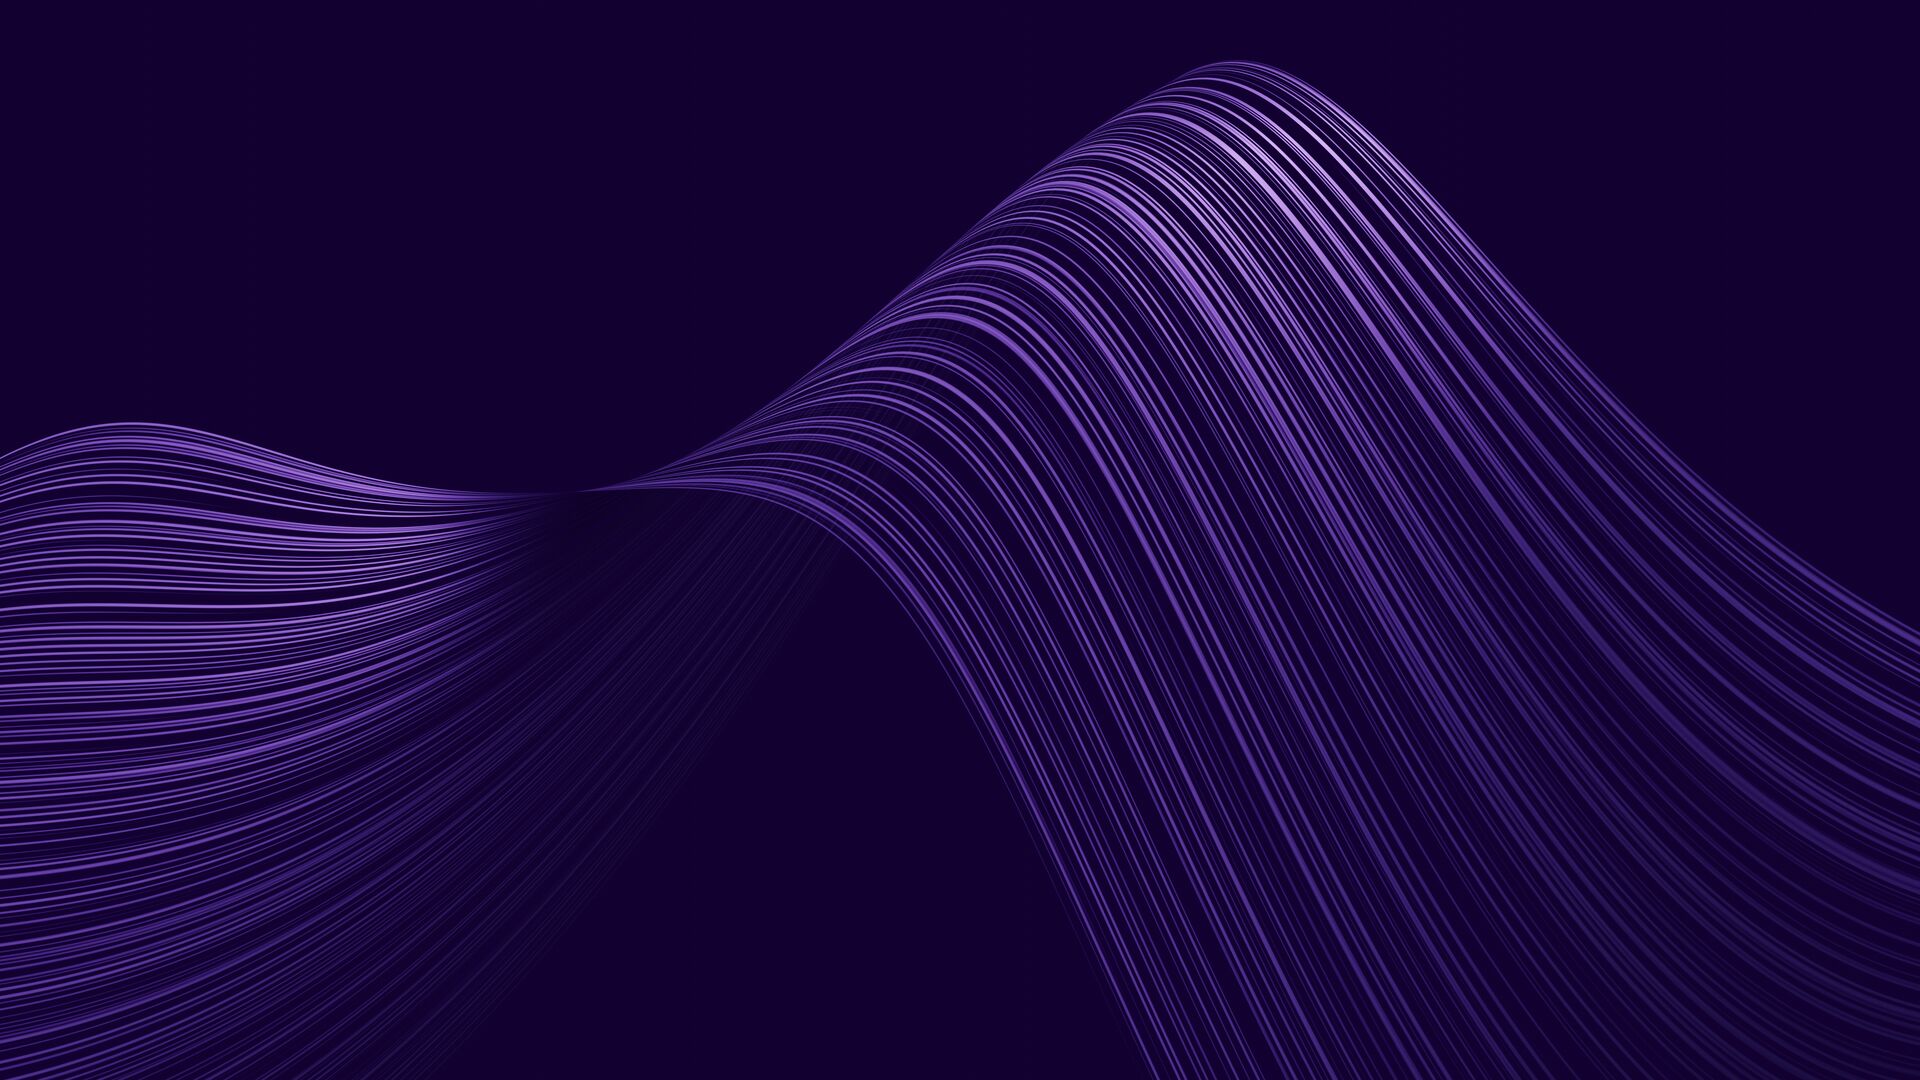 Image is sleek and abstract of thin purple lines cascading against a black background like waves of sound. Cowen’s Thematic Outlook podcast series, hosted by Head of Thematic Content Bill Bird focuses on emerging growth and disruptive innovation. In collaboration with Cowen’s fundamental equity research team and Washington Research Group, the series unpacks the most pivotal investment themes which Cowen expects to drive investment gains and losses in 2022 and beyond.